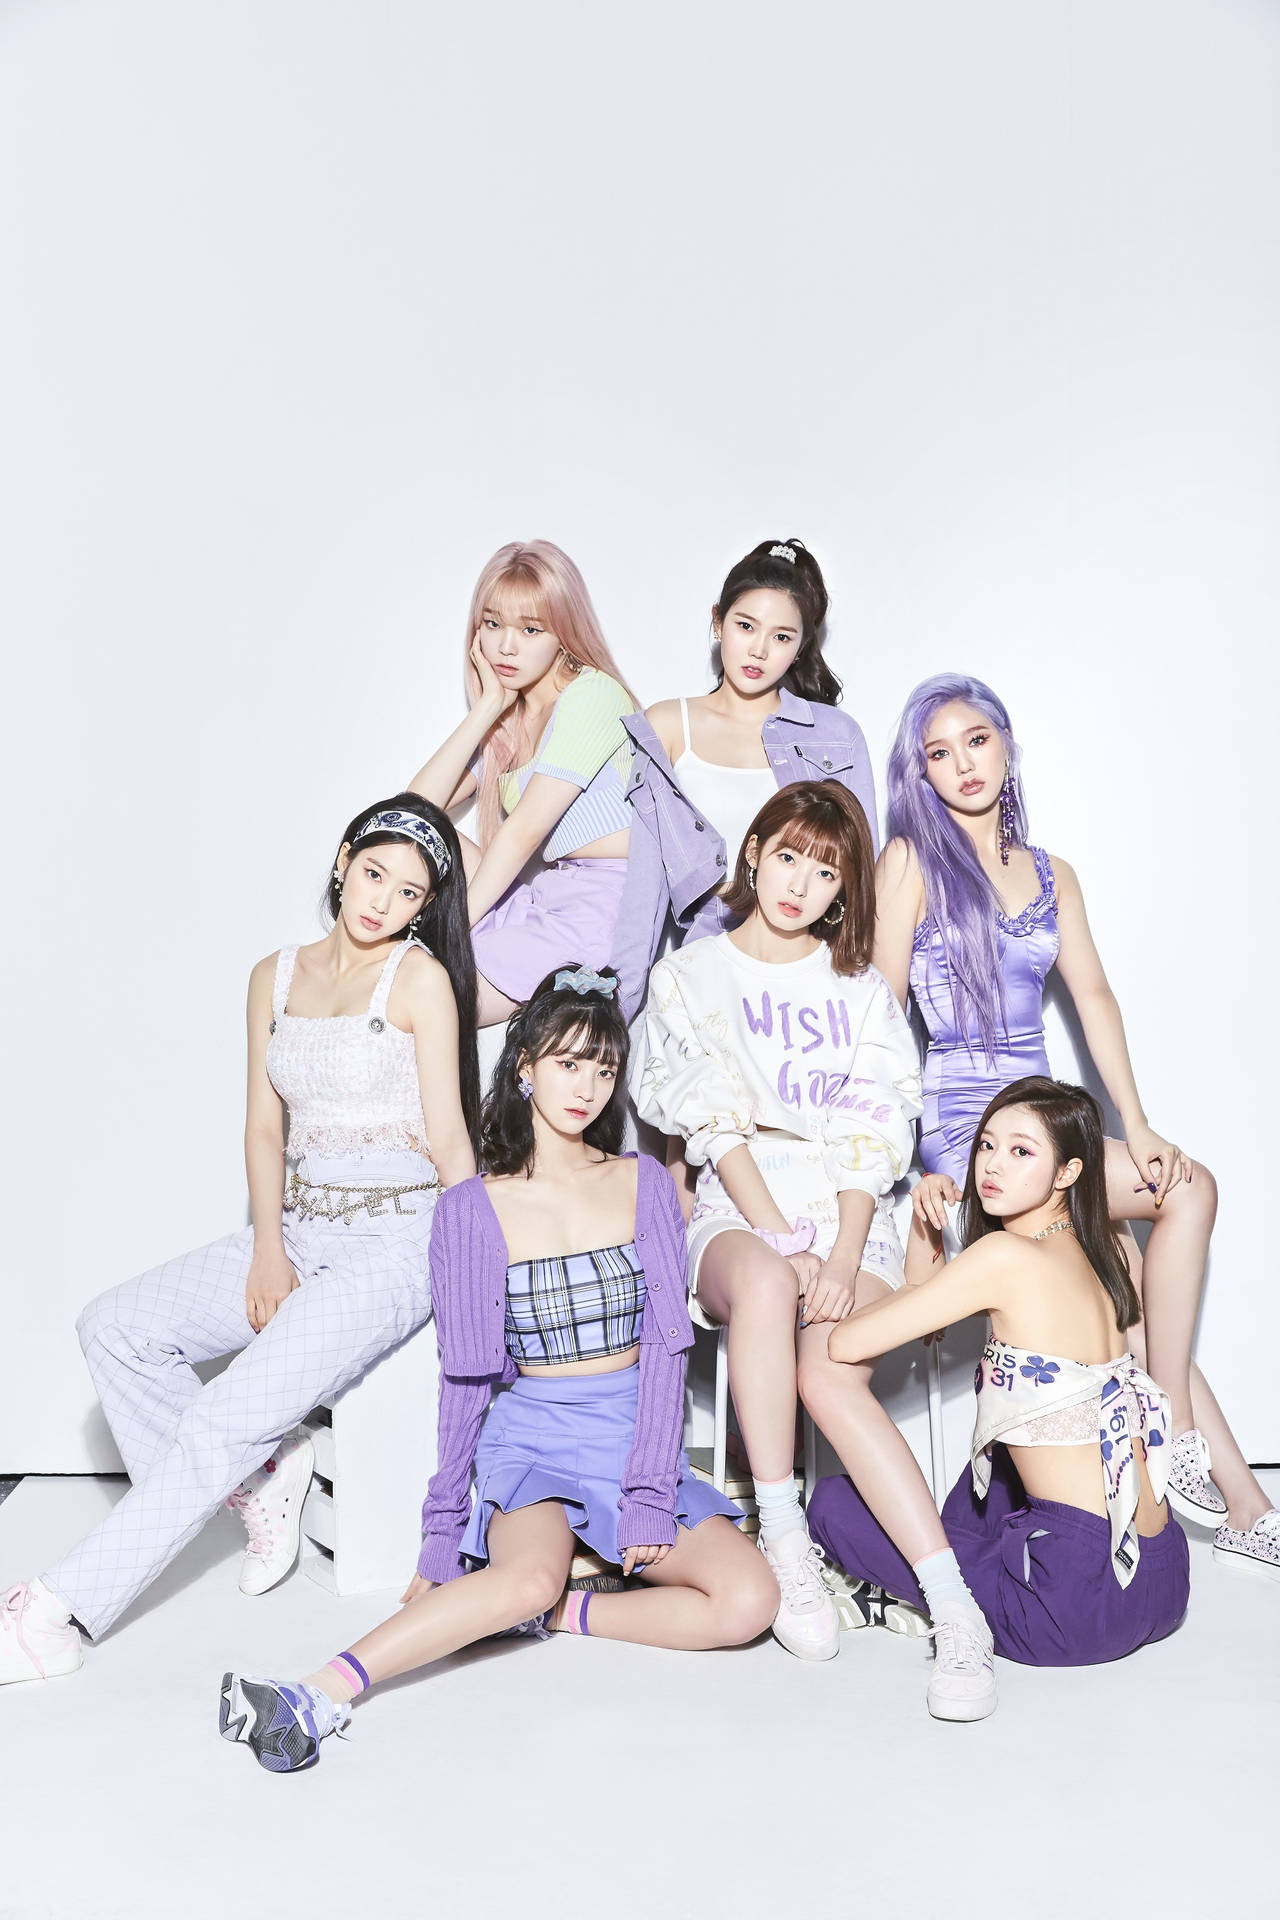 Oh My Girl Pastel Purple Outfits Background